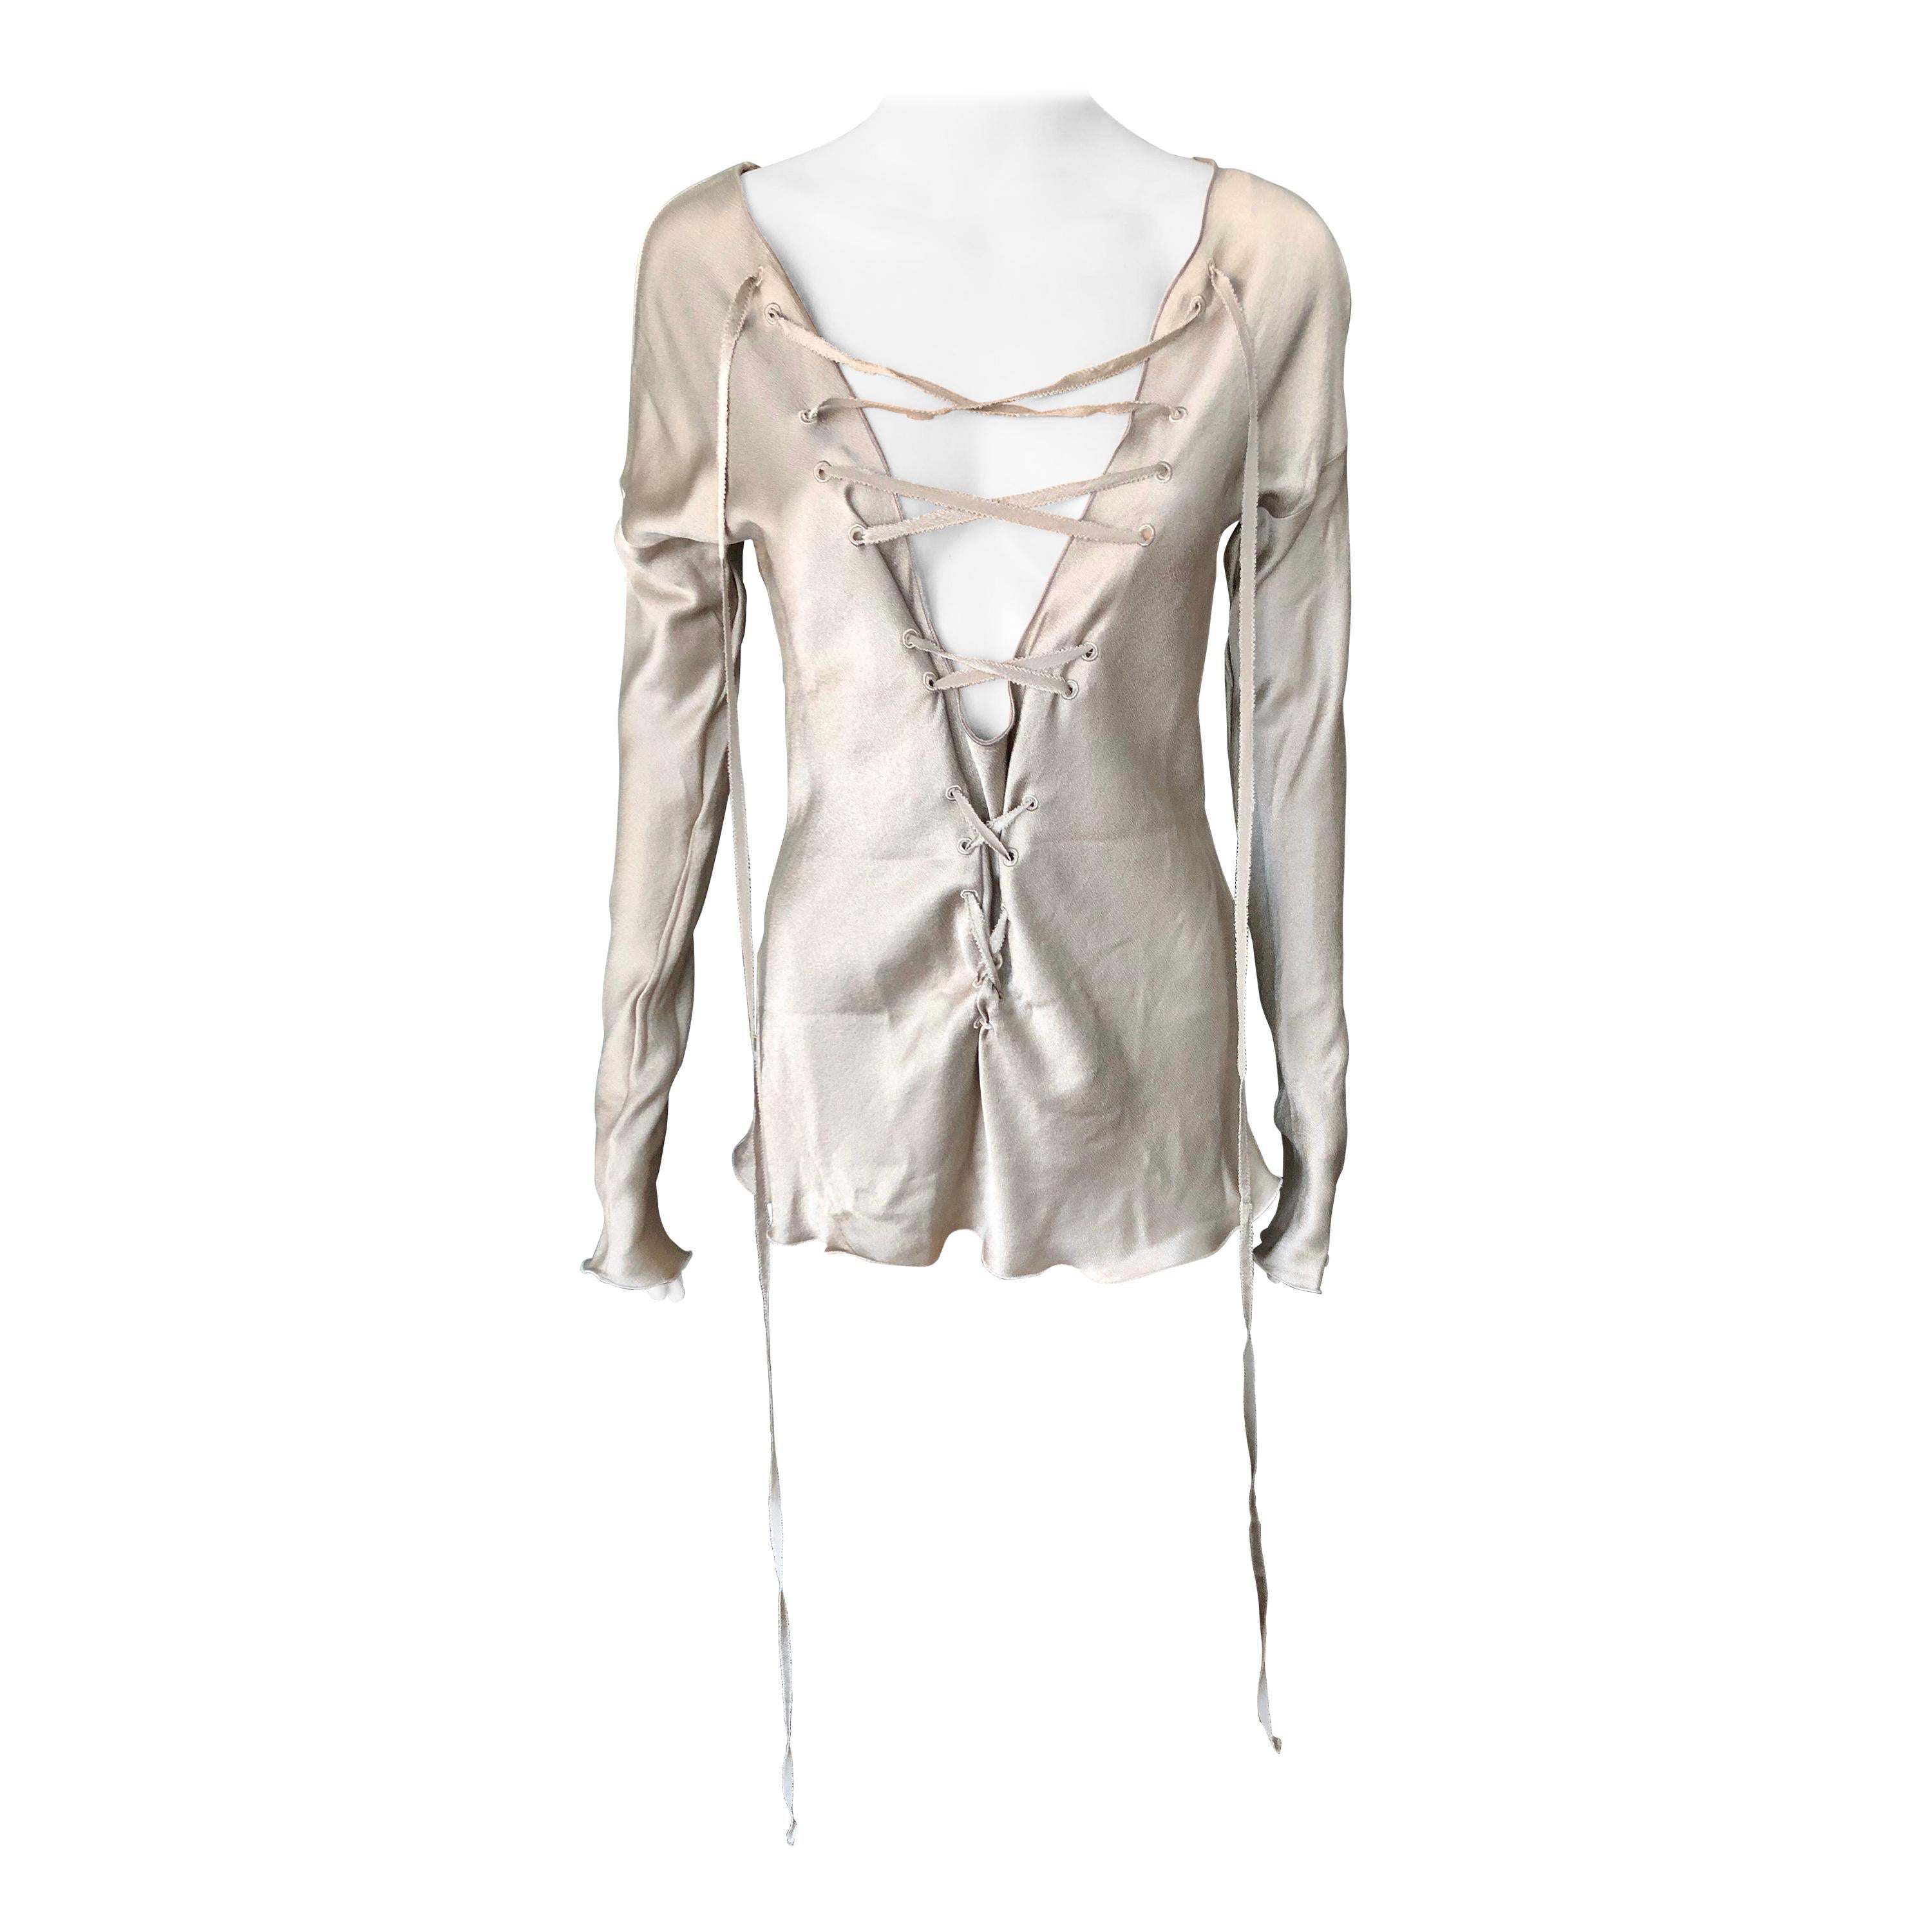 Tom Ford for Gucci S/S 2002 Plunging Neckline Lace Up Blouse Top 